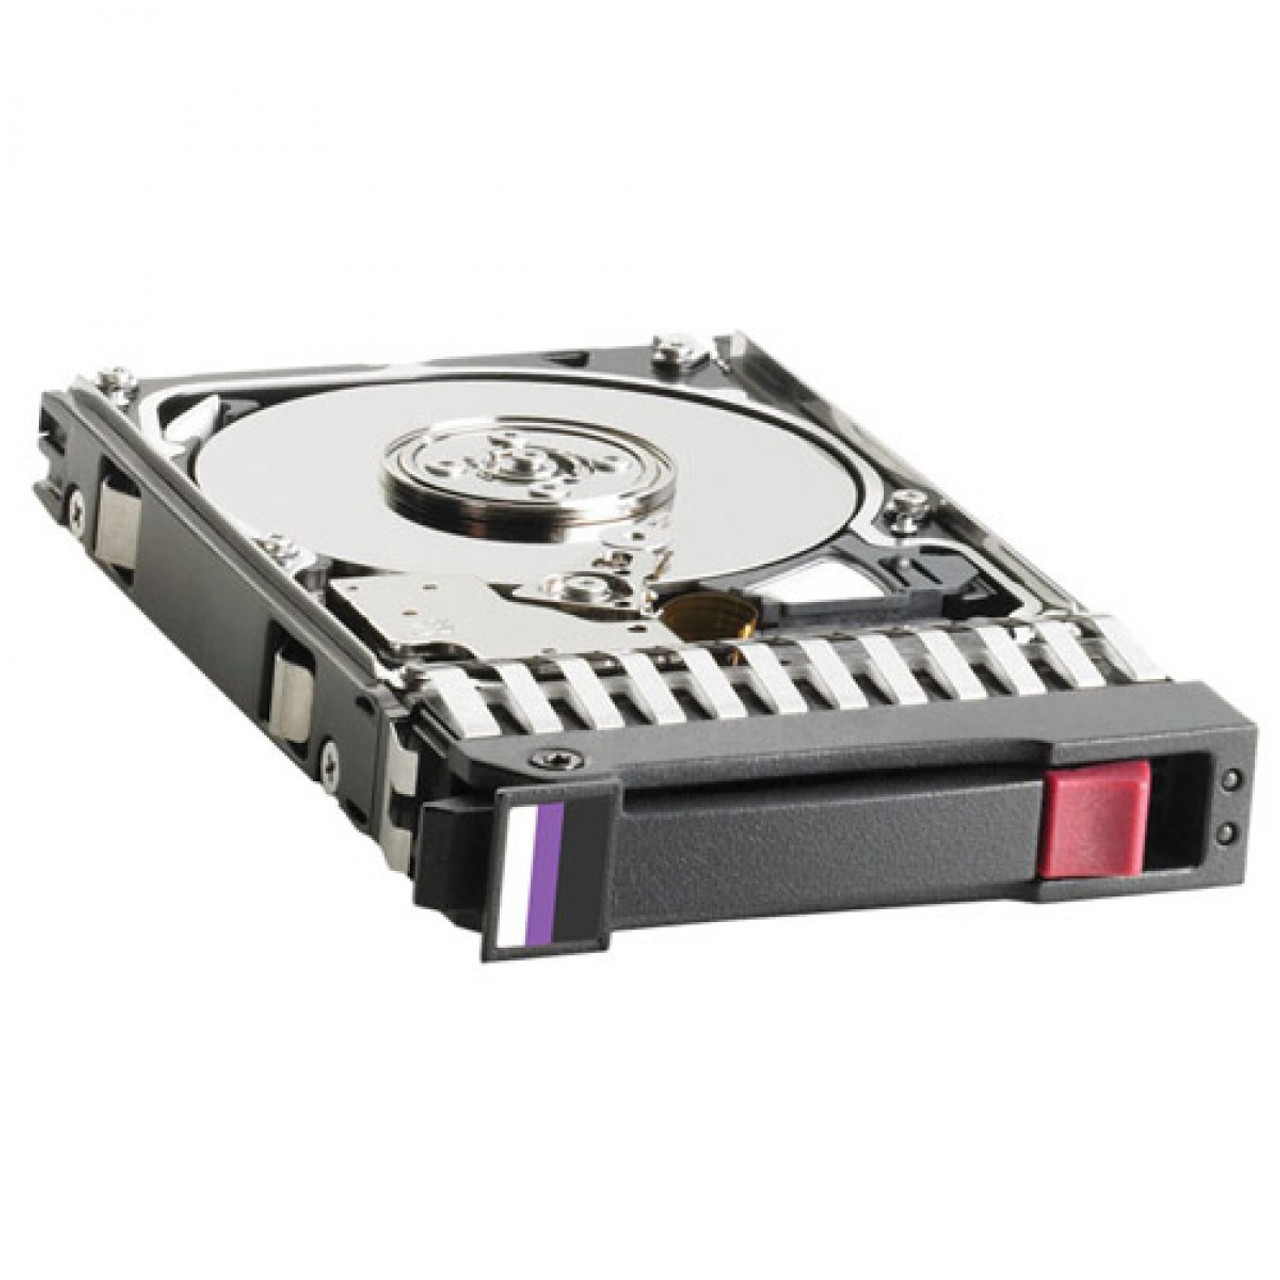 G5DM2 - Dell 2TB 7200RPM Near Line SAS 12GB/s 512E 2.5-inch Hot-pluggable 128MB Cache Hard Drive with Tray